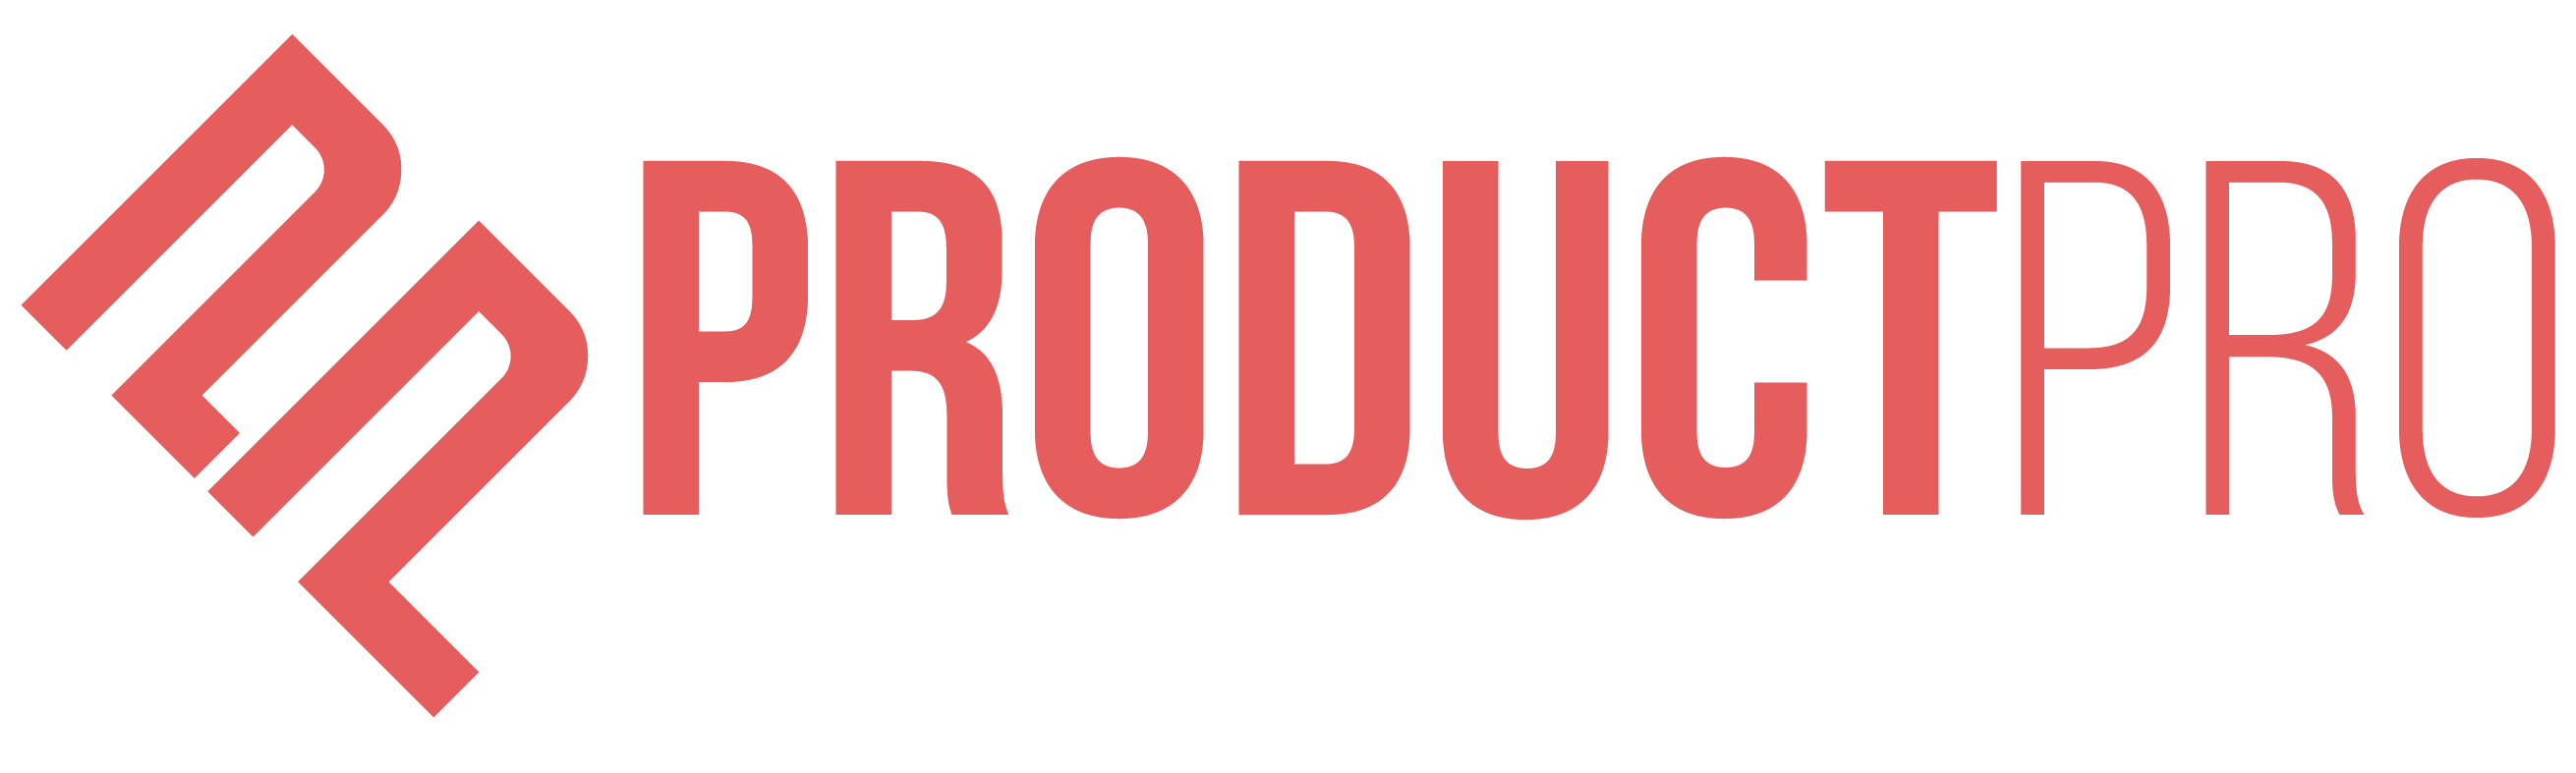 ProductPro-Improve Your Dropshipping